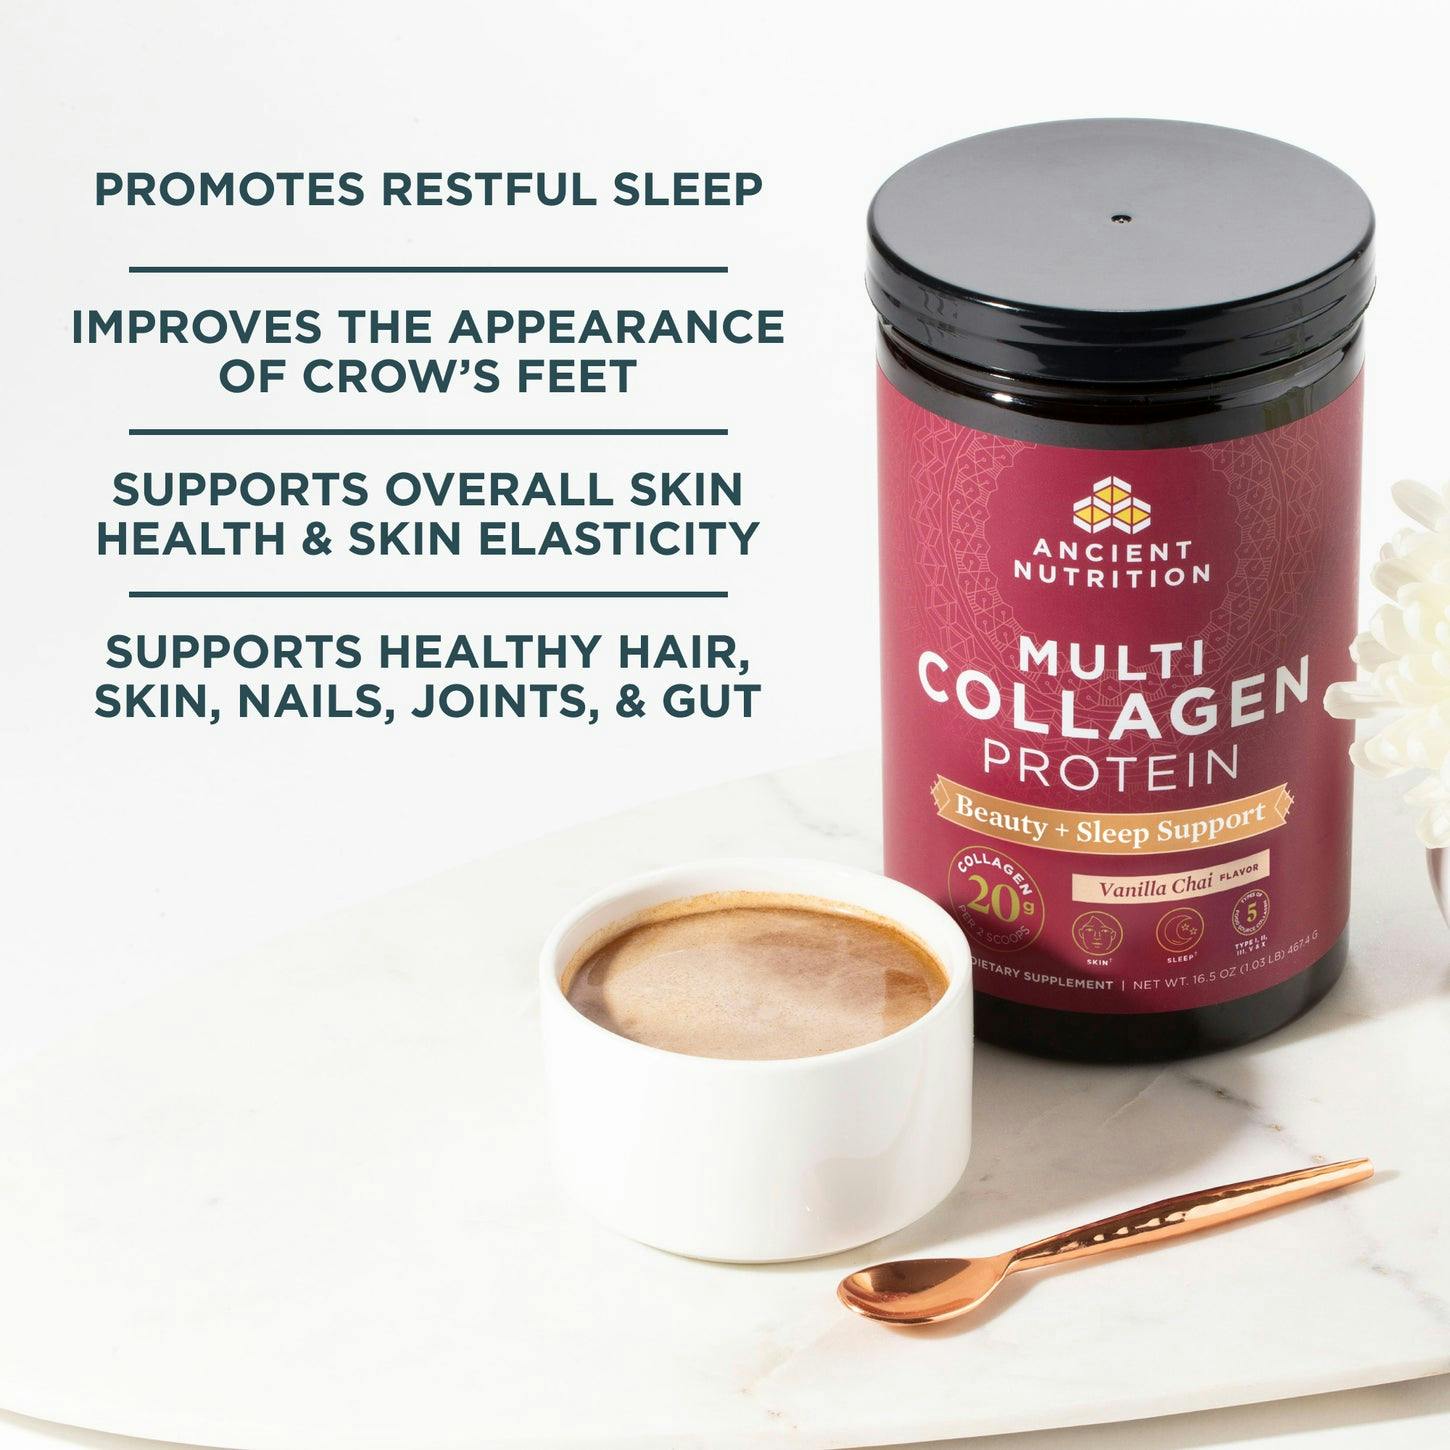 multi collagen protein beauty + sleep support next to white coffee cup